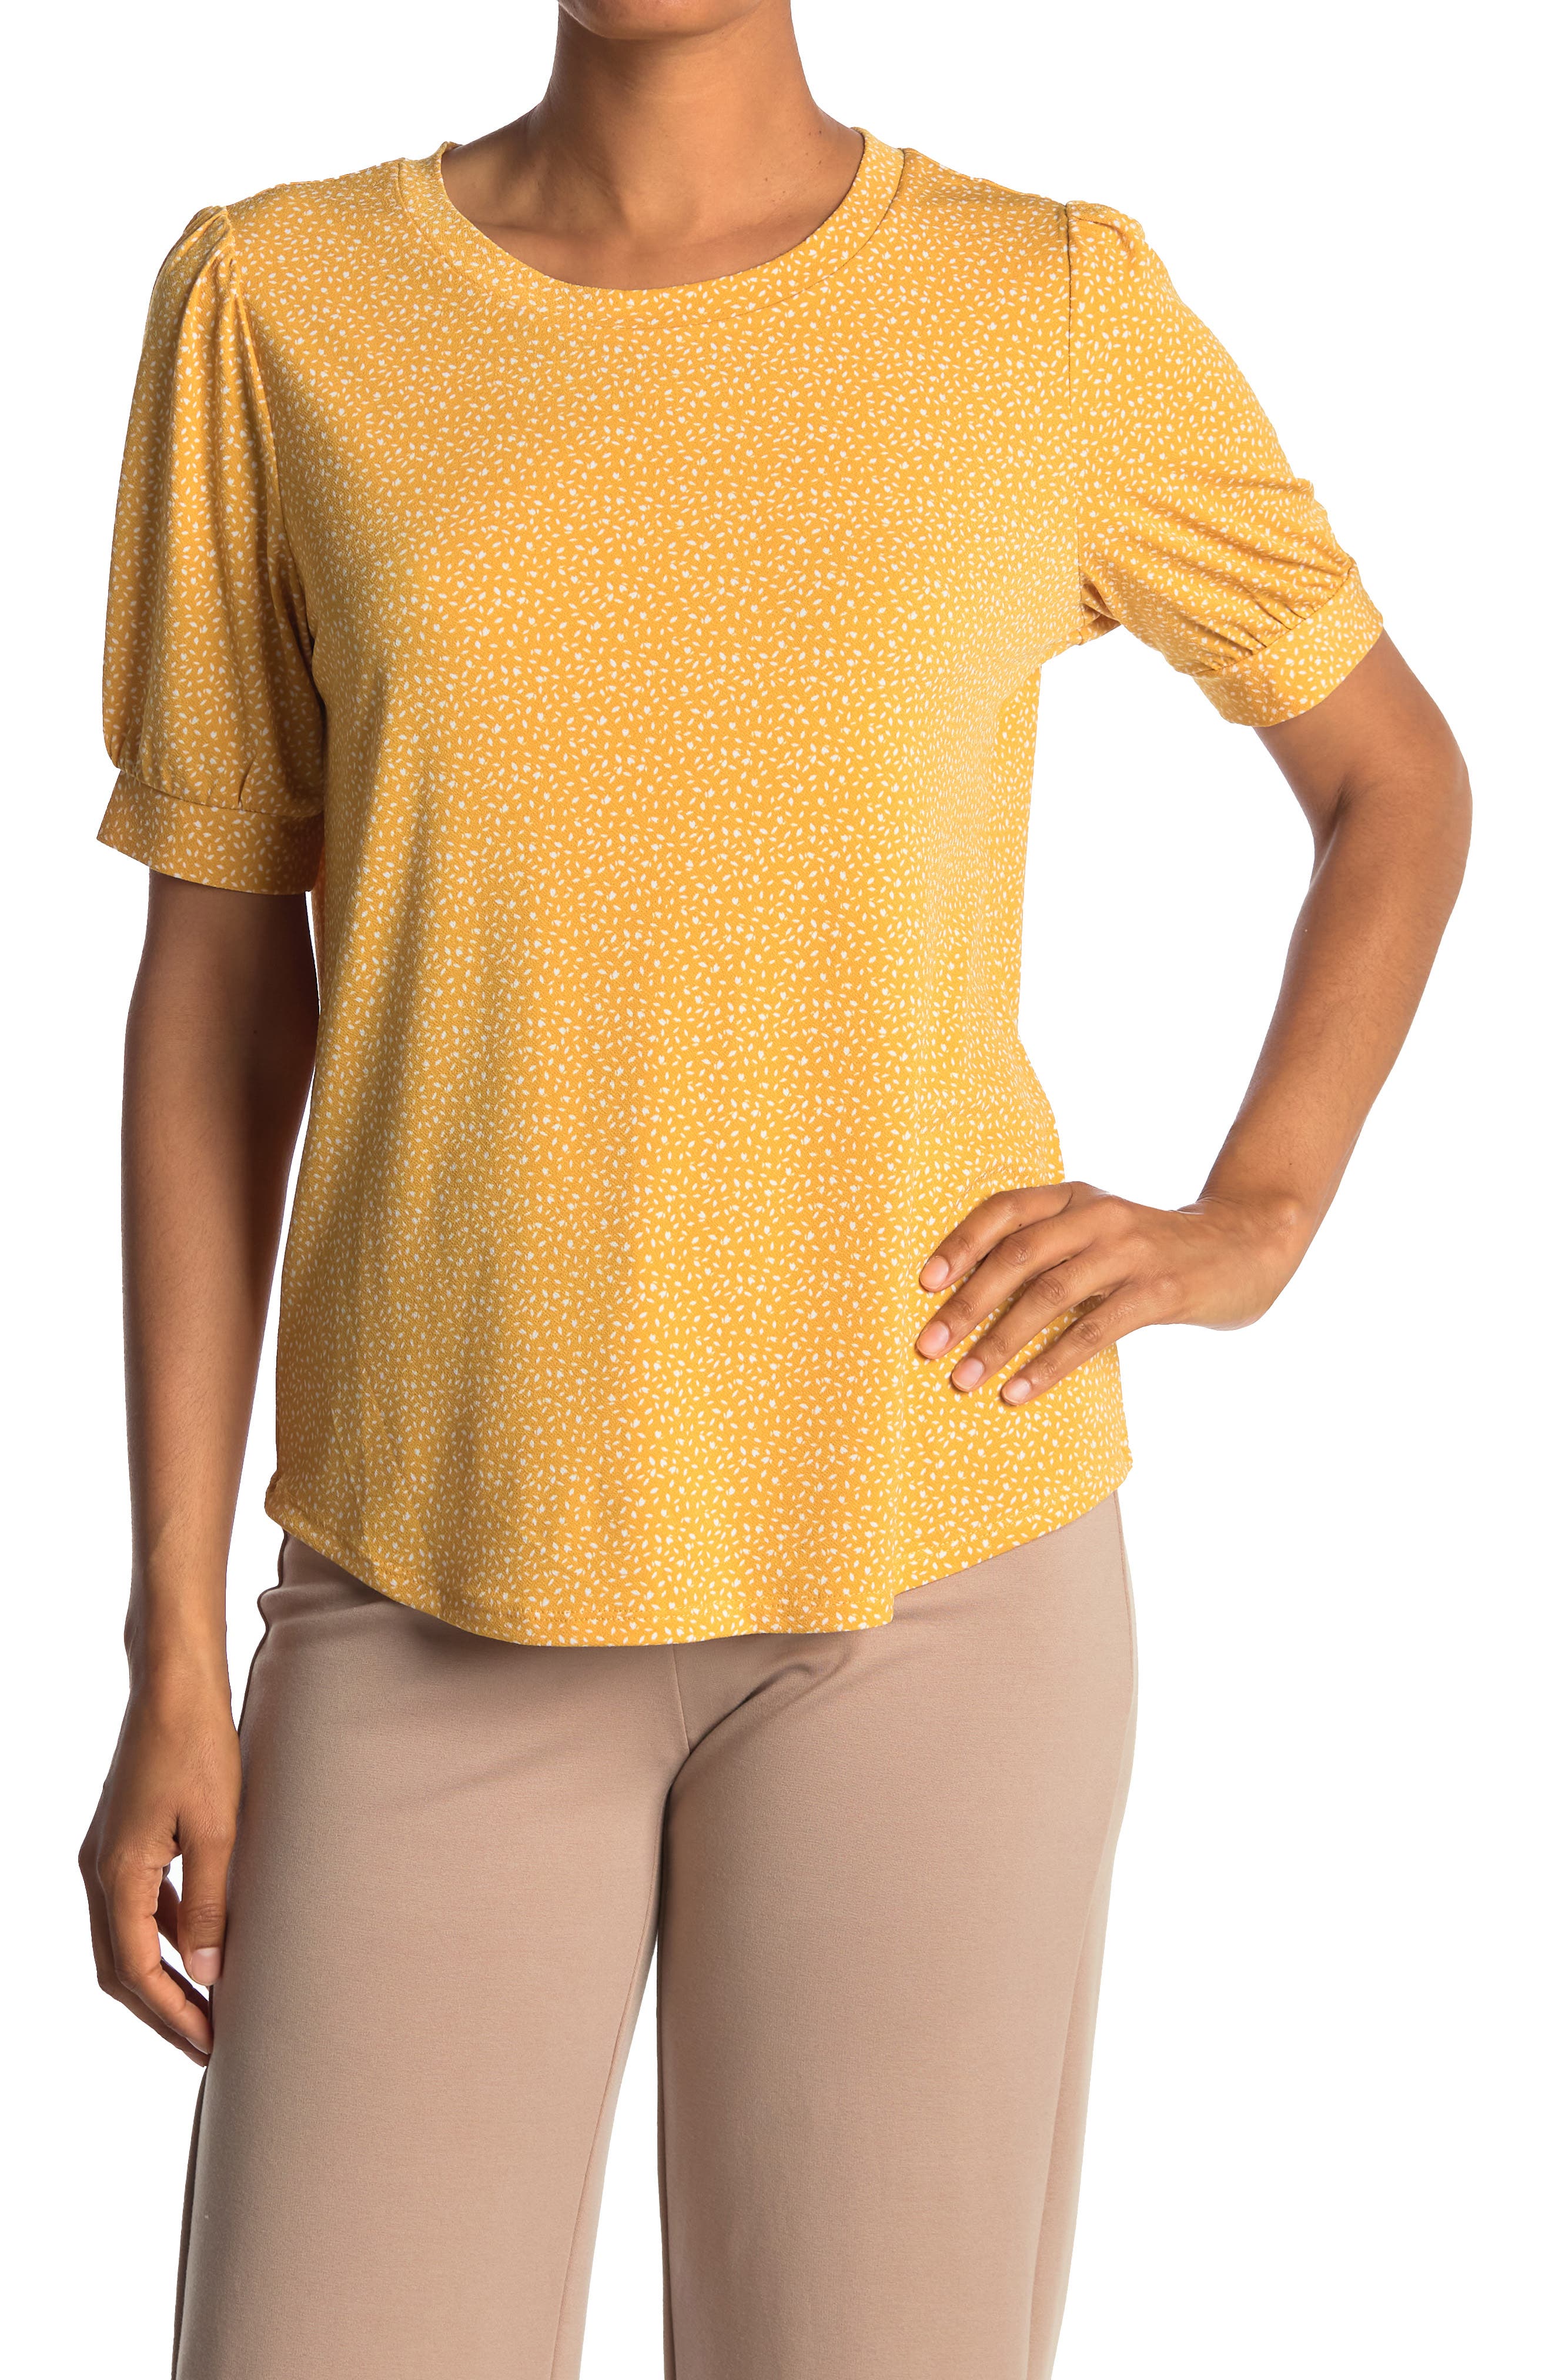 Adrianna Papell Patterned Crinkle Textured Puff Sleeve Top In Open Yellow46